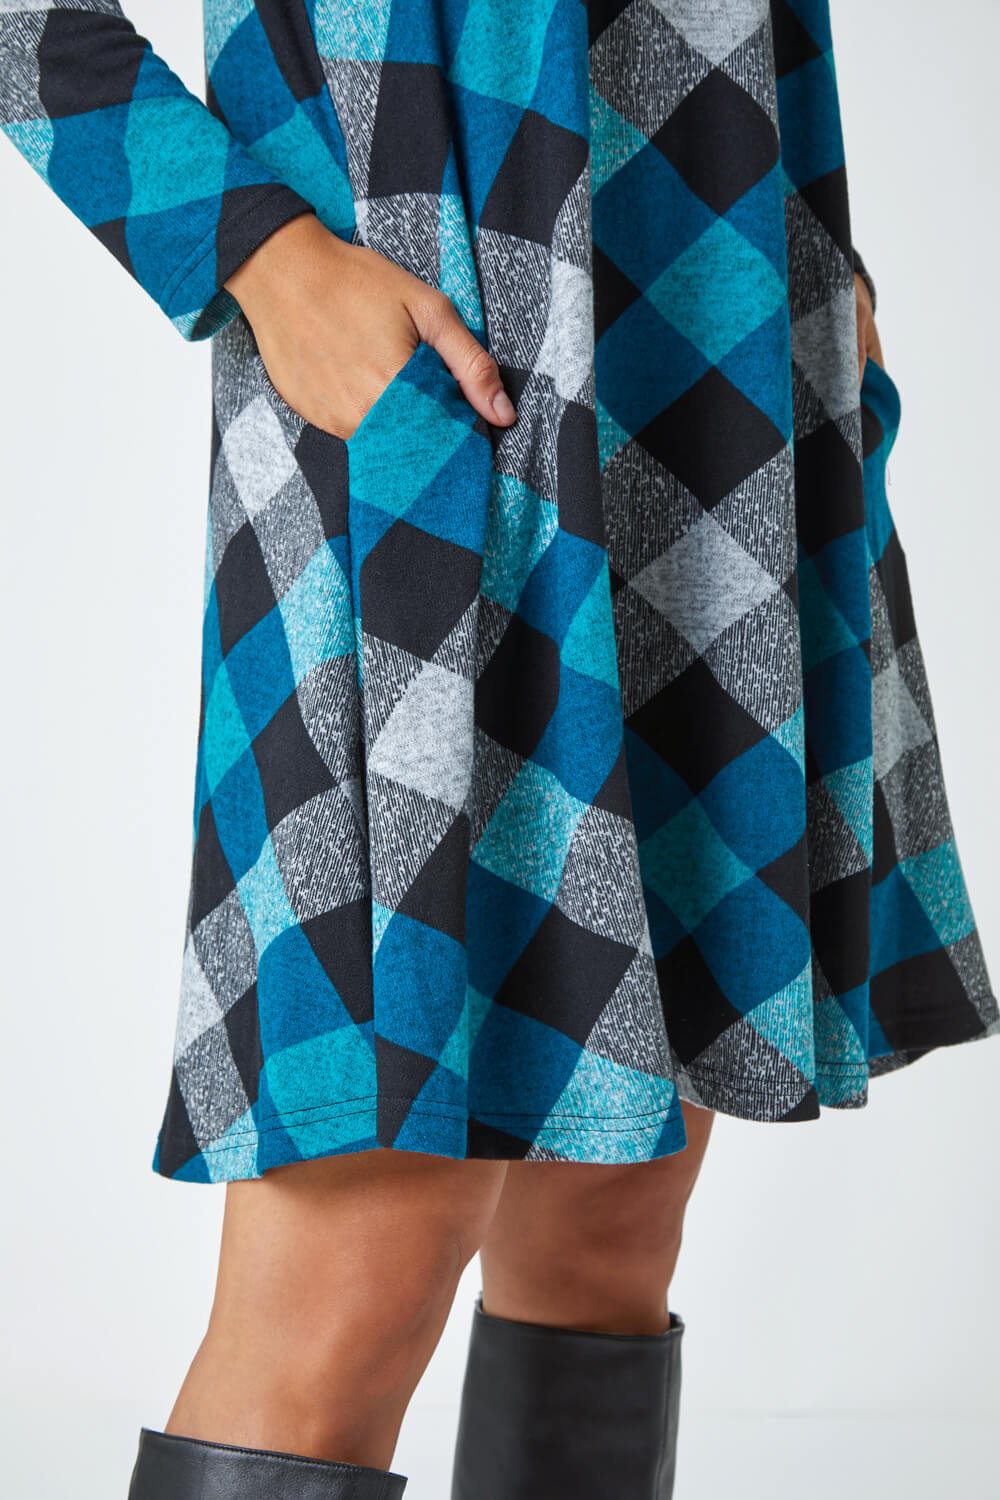 Teal Check Print Swing Stretch Dress, Image 5 of 5